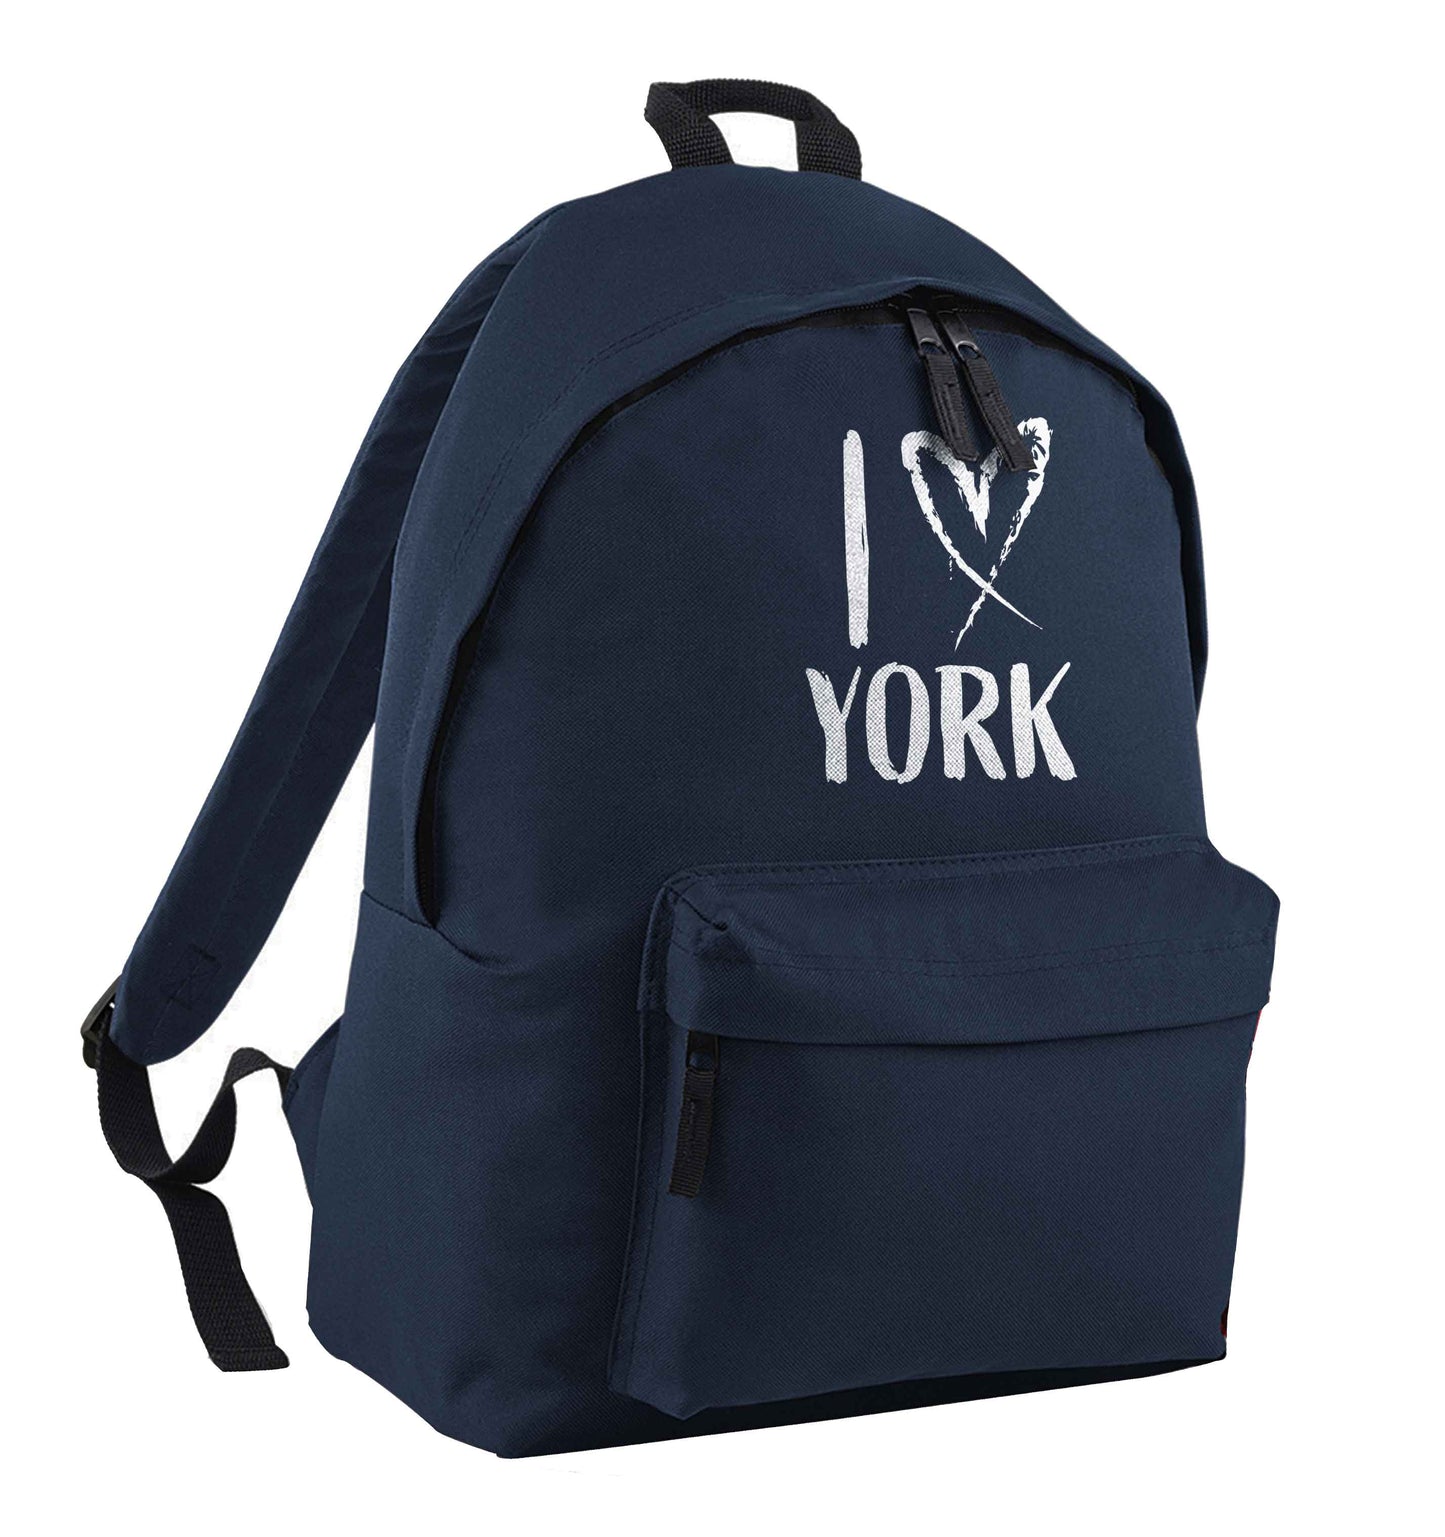 I love York navy adults backpack